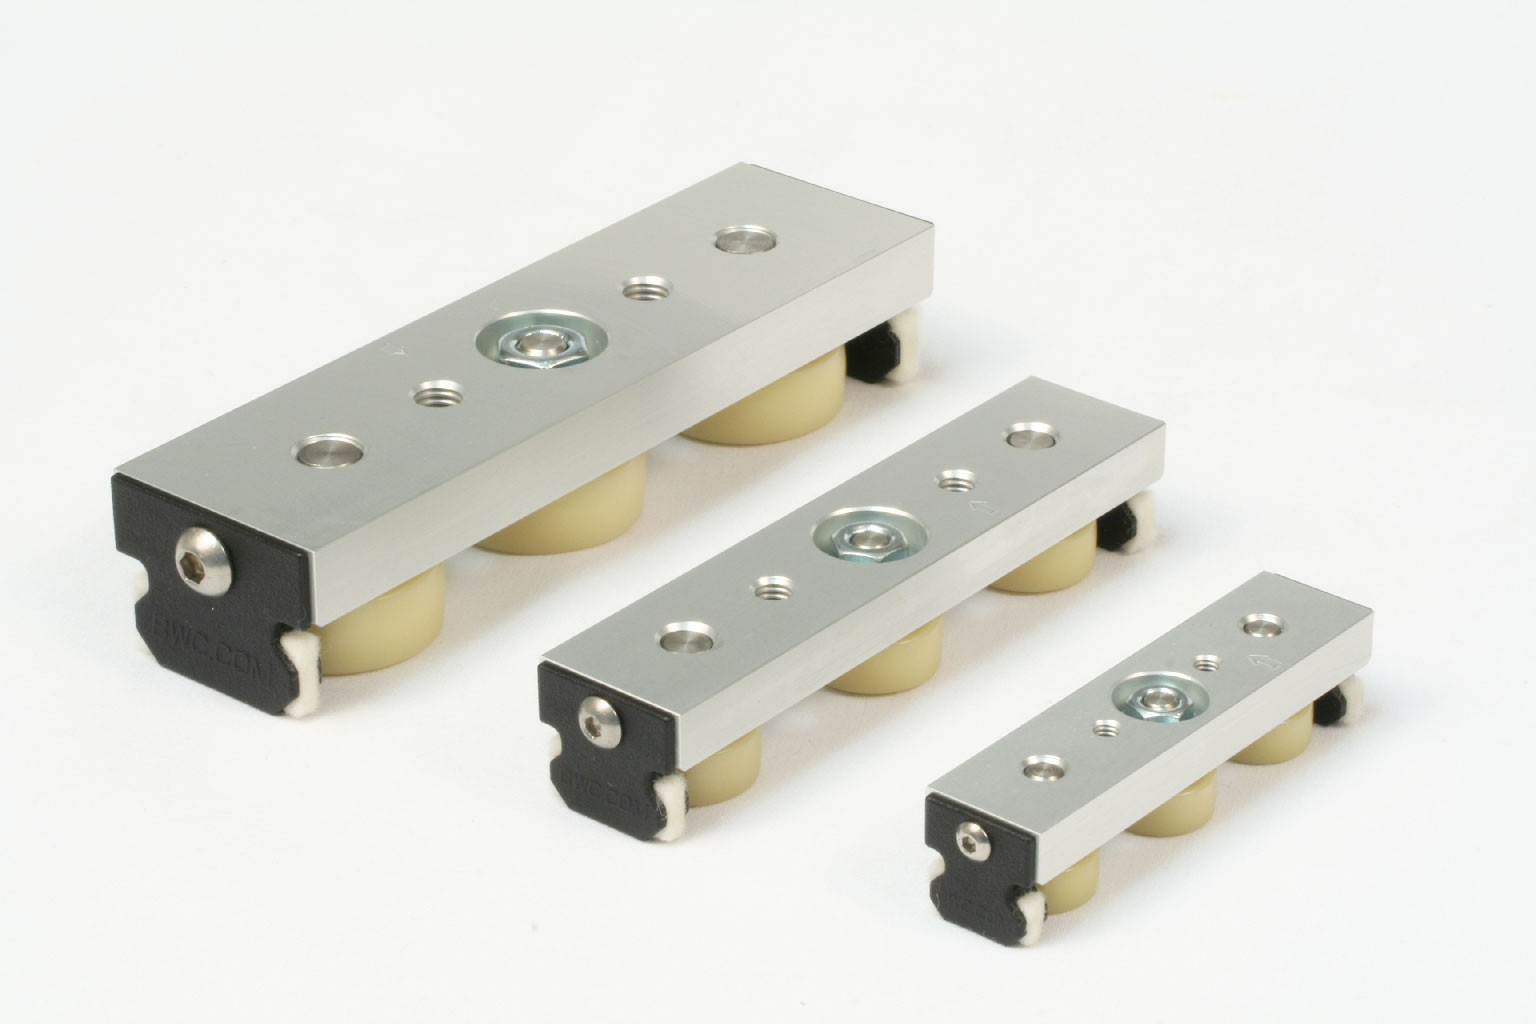 Three sizes of UtiliTrak wheel plate assemblies with polymer crowned rollers.